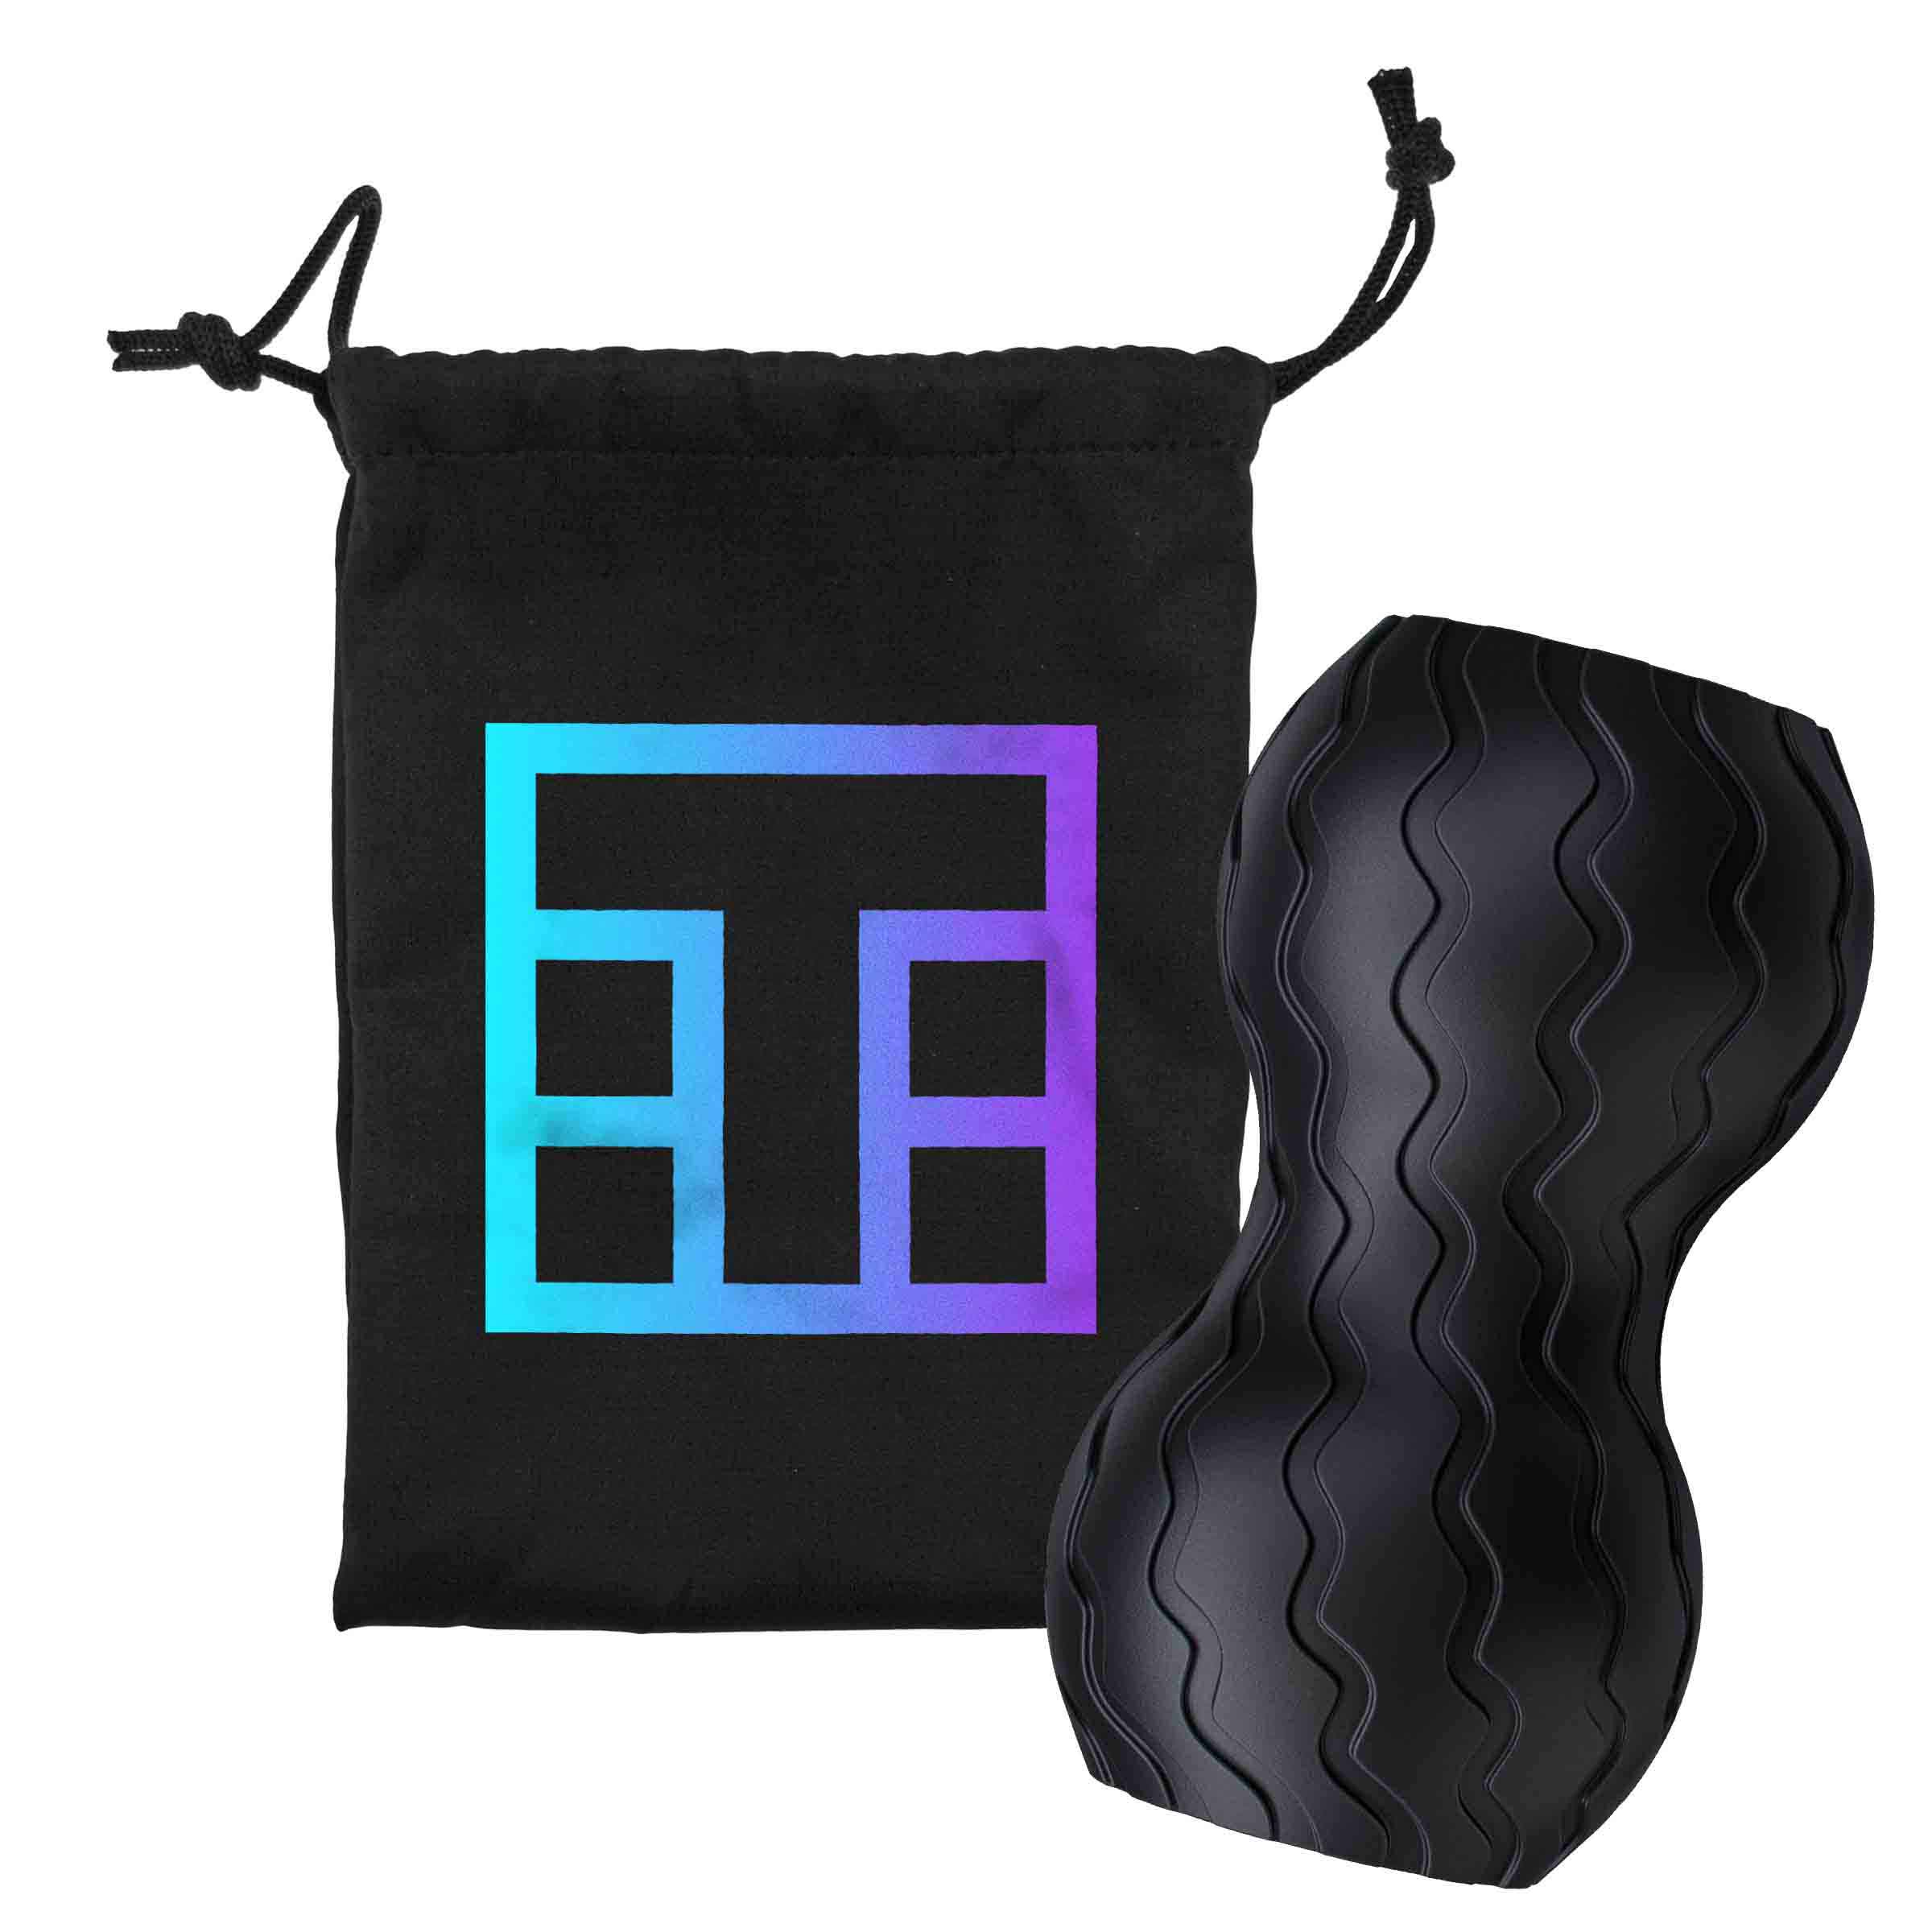 Therabody Wave Duo Black - Personalise with a pouch with thermal print in full colour and a sleeve